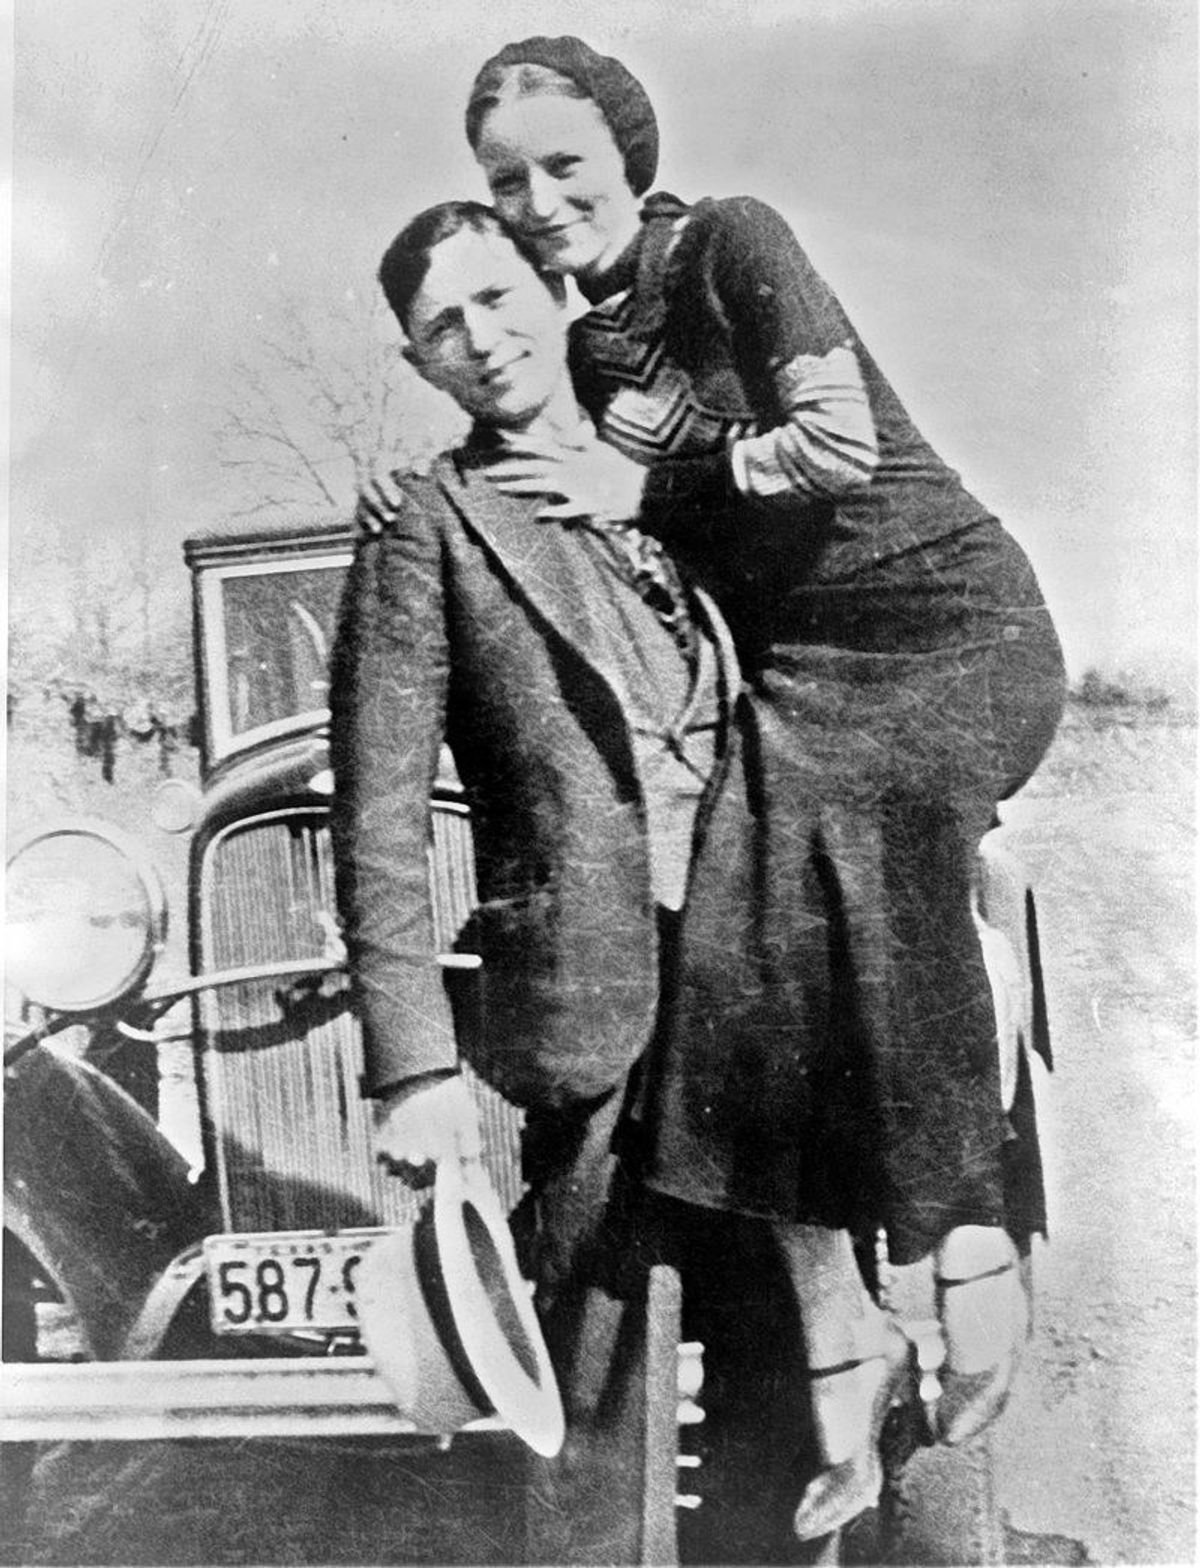 Bonnie and Clyde: A Toxic Love Not To Be Romanticized